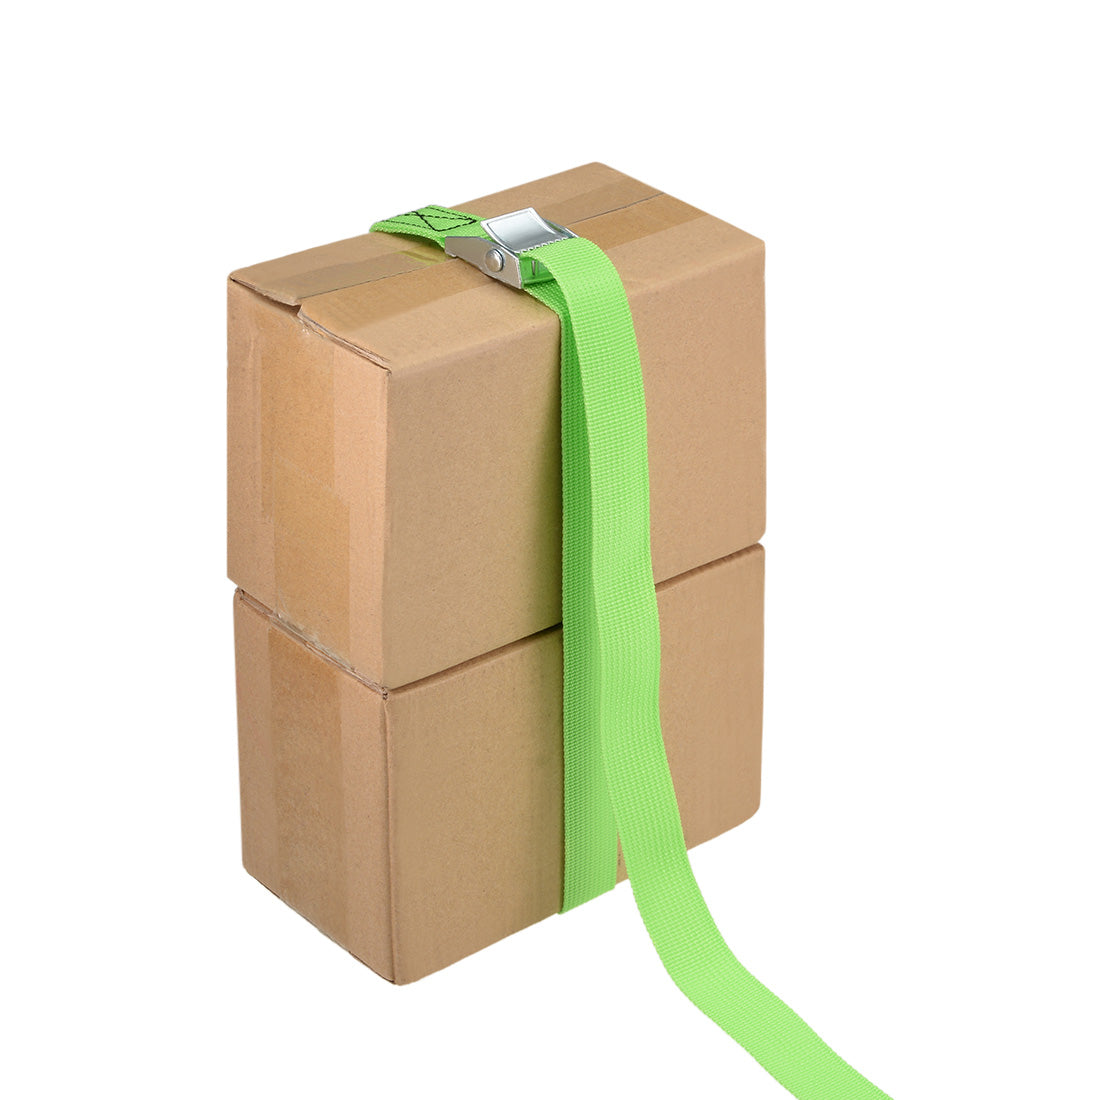 uxcell Uxcell Lashing Strap 1" x 5' Cargo Tie Down Straps with Cam Lock Buckle Up to 551lbs Green 4pcs